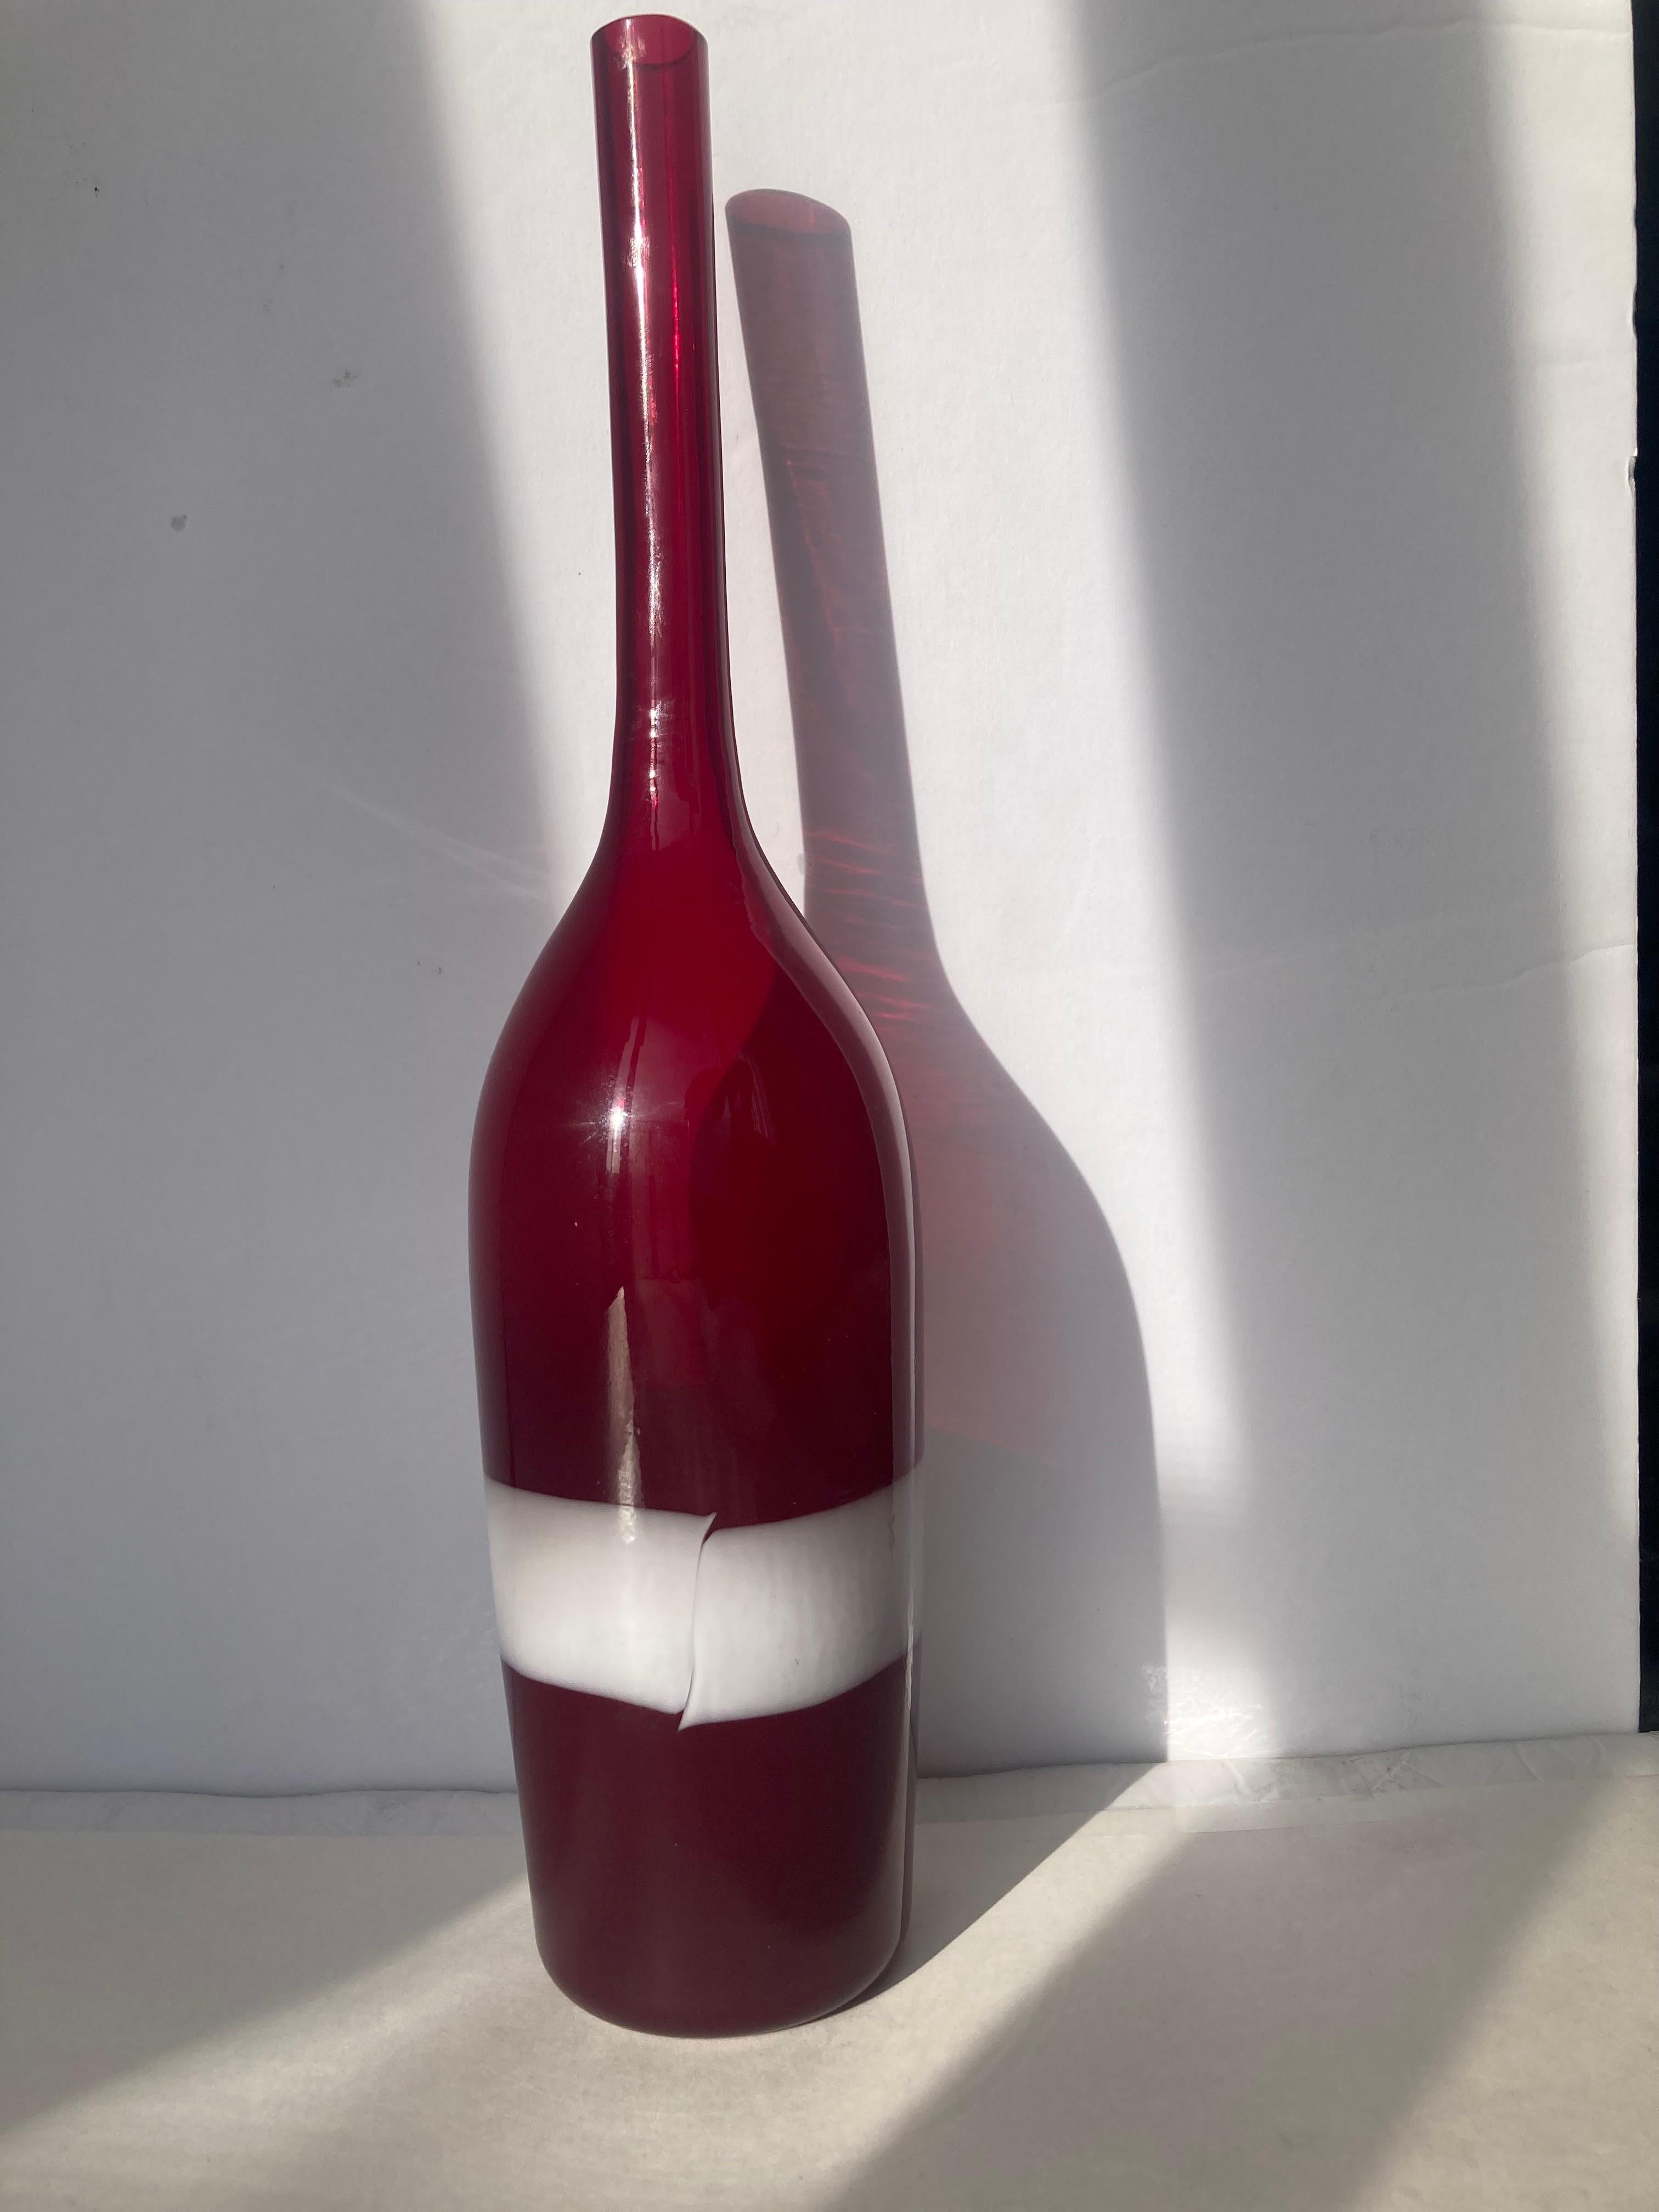 Hand-Crafted Fulvio Bianconi for Venini, Murano Glass Bottle / Decanter, Signed, Label For Sale